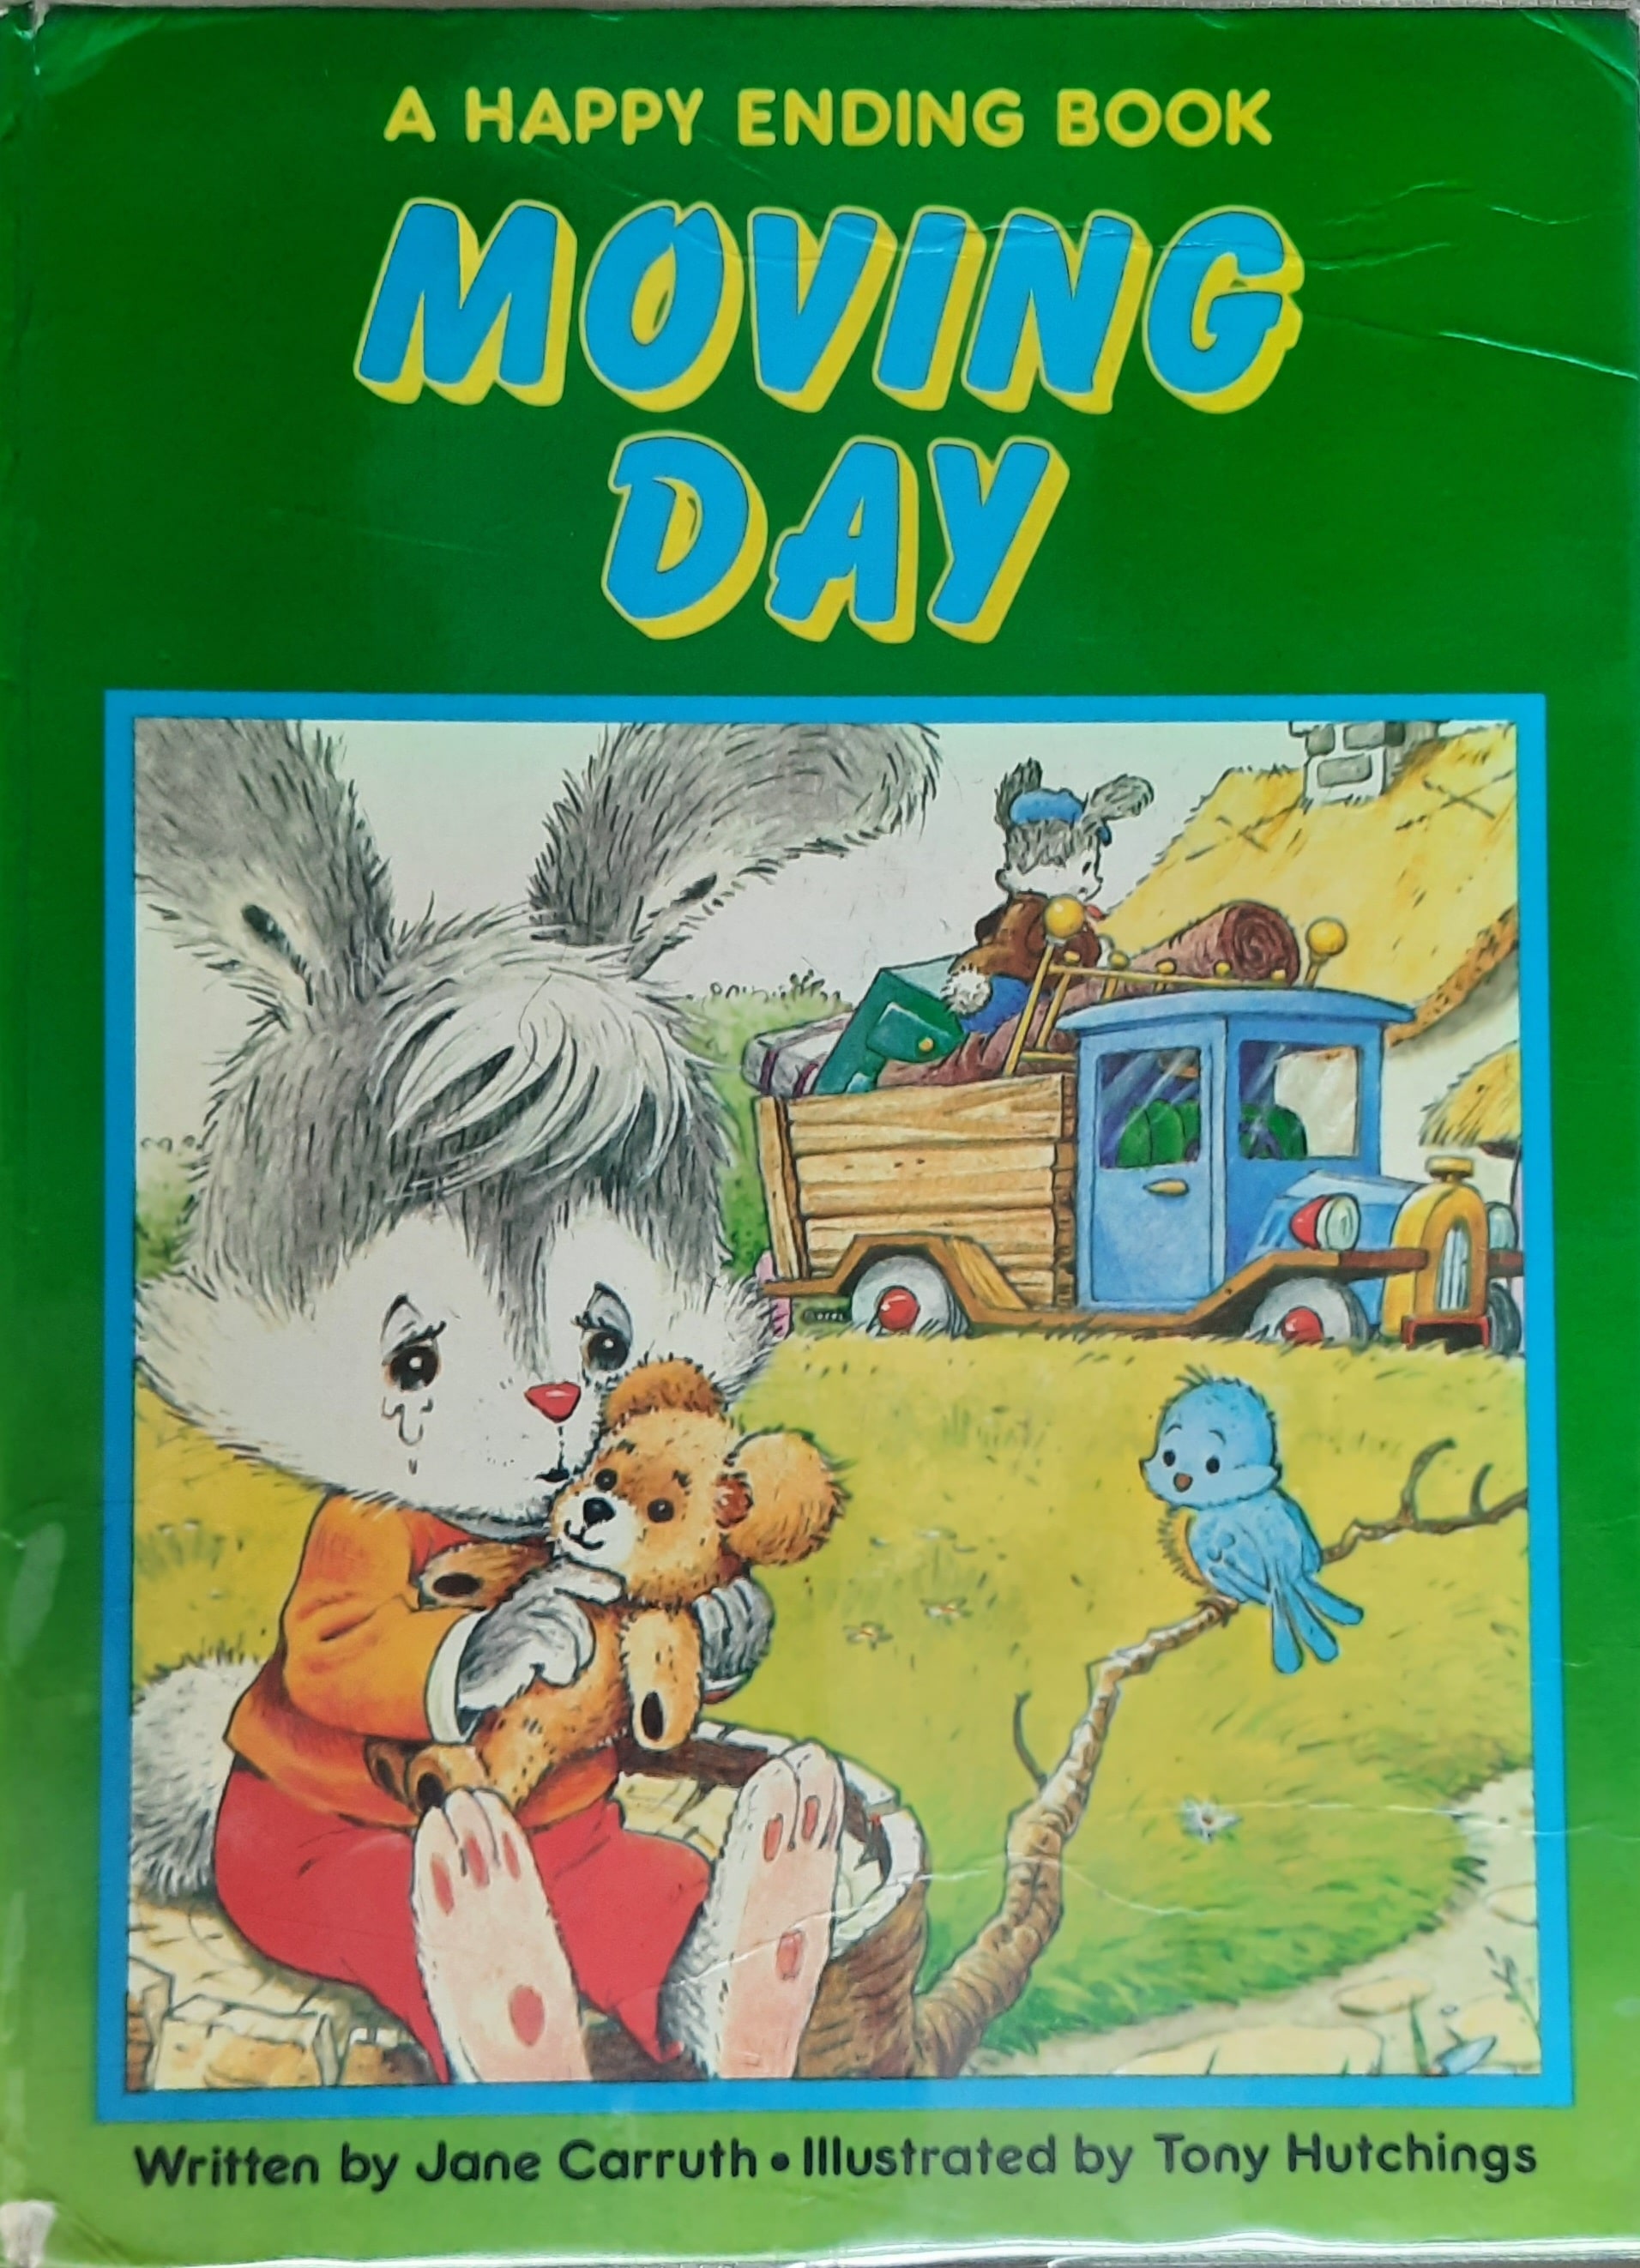 IMG : Moving Day